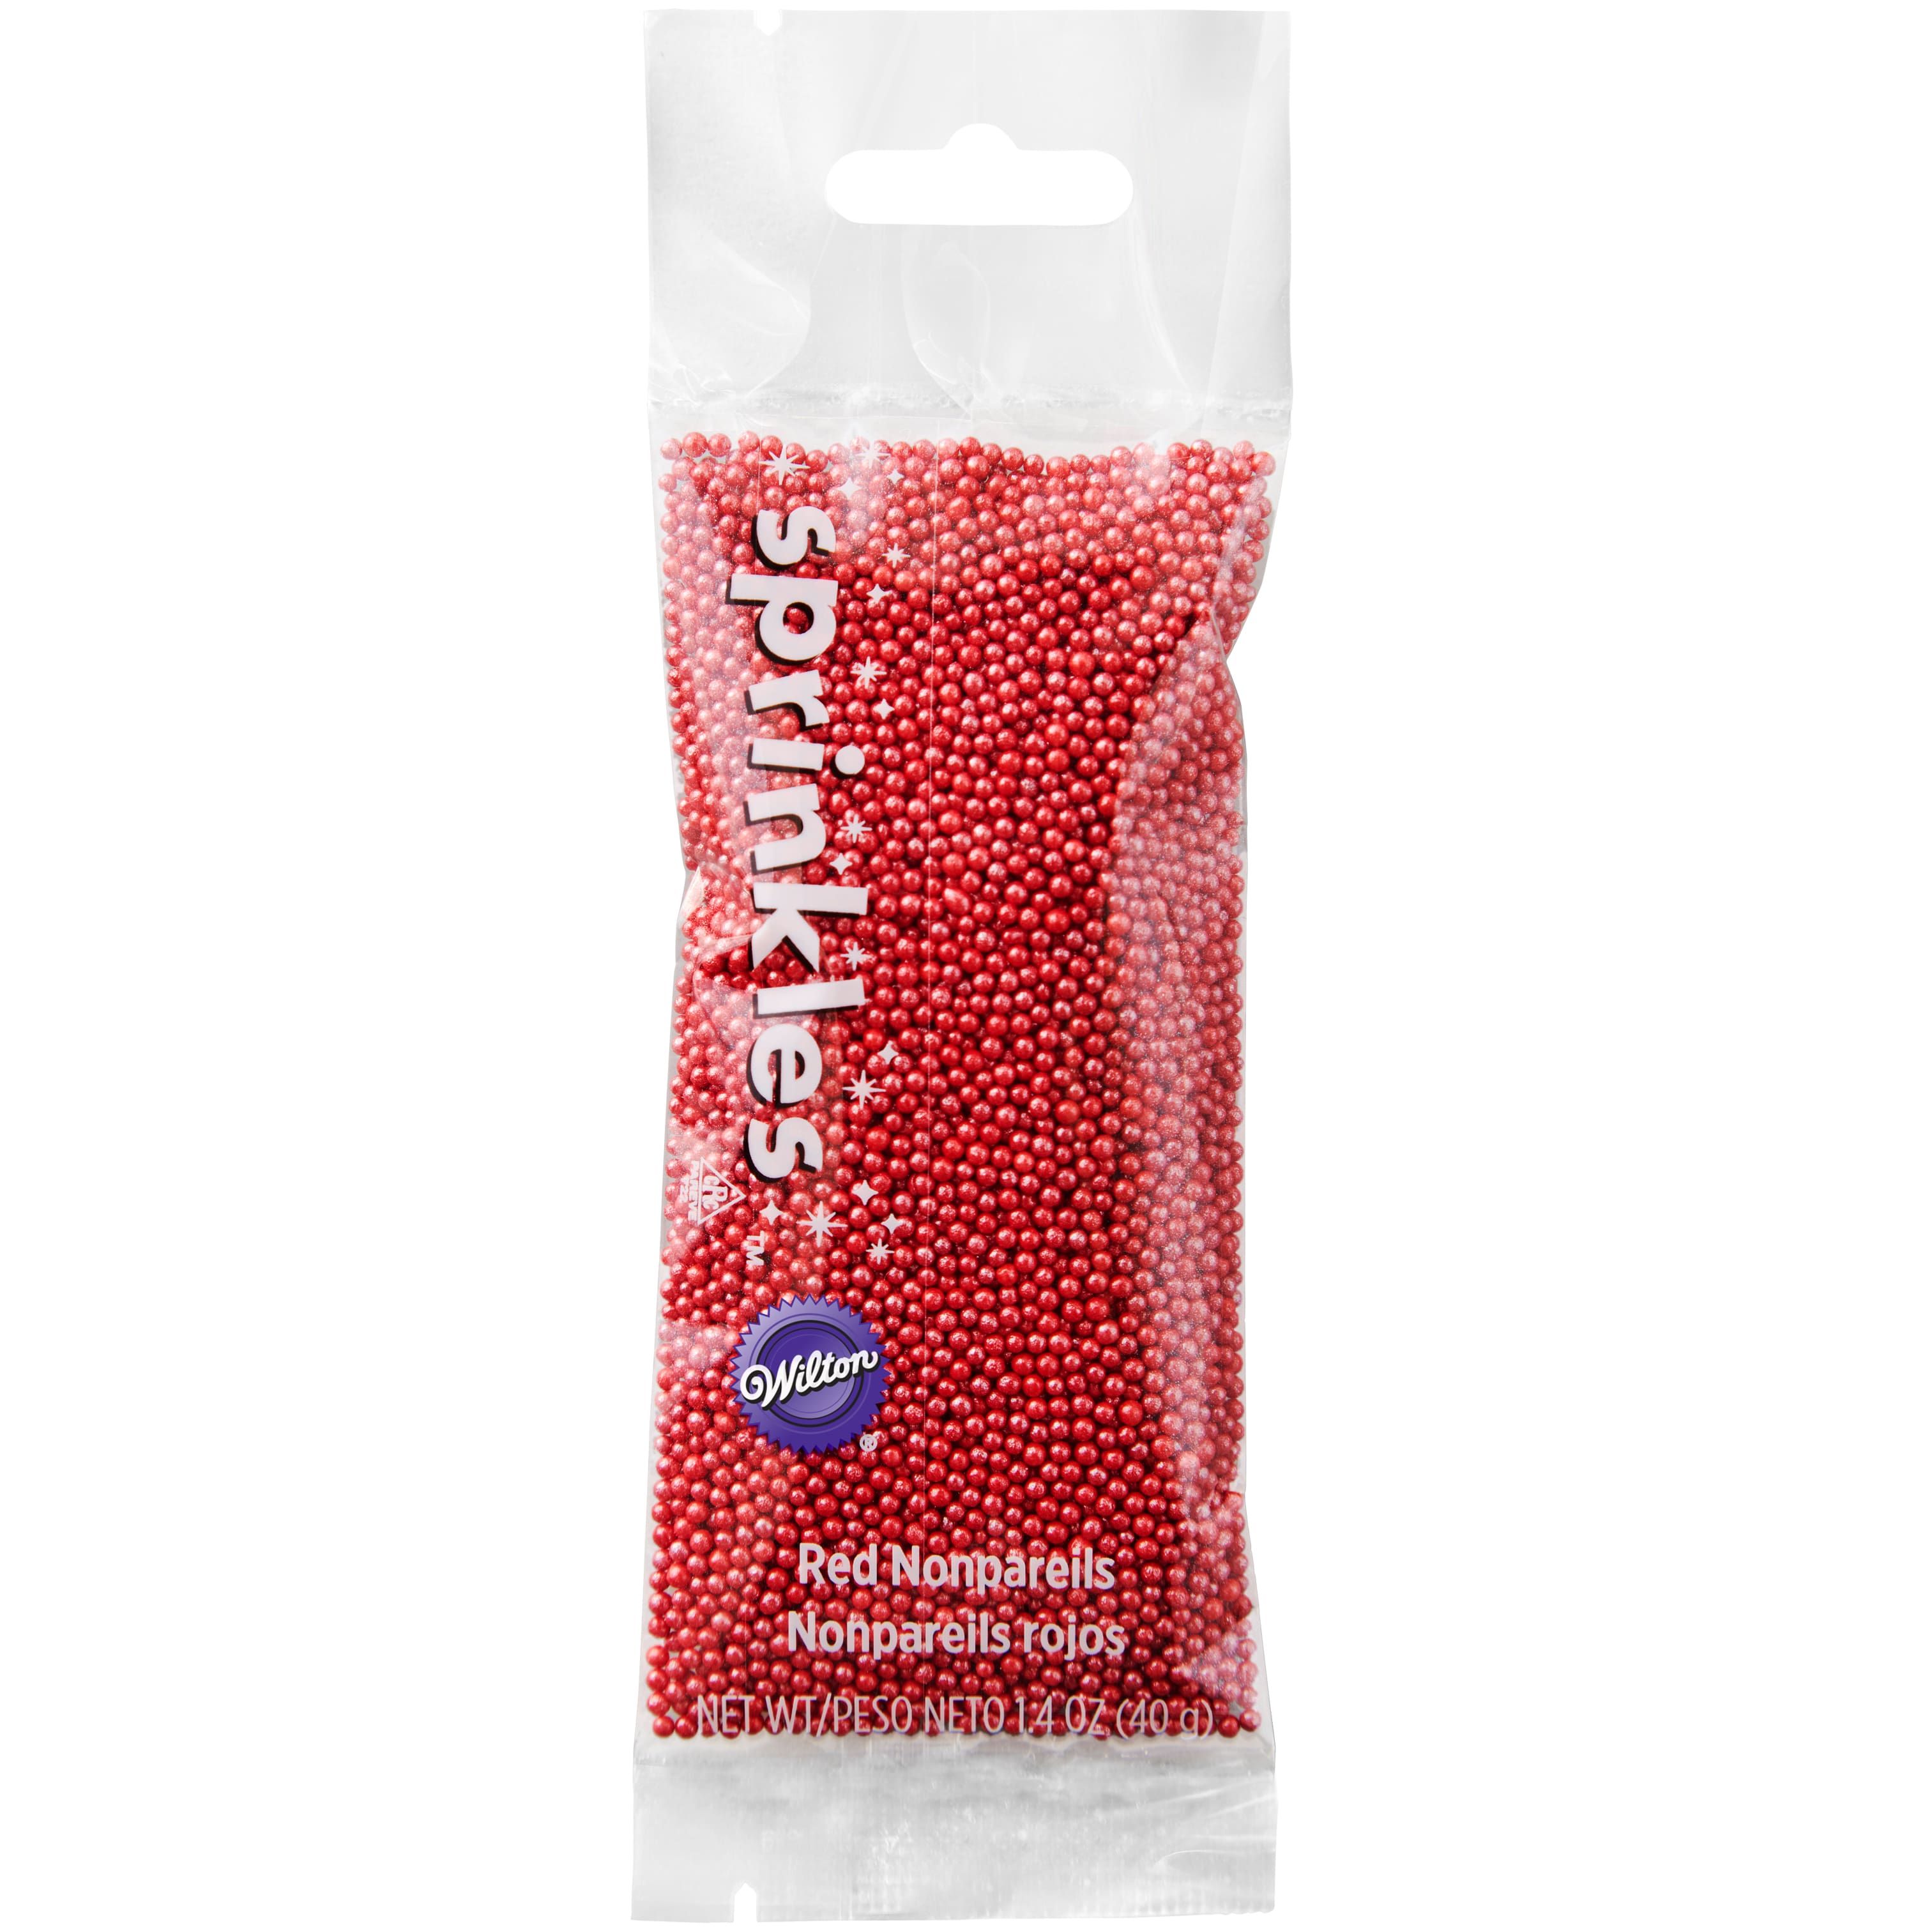 Find The Wilton Nonpareils Sprinkles™ Pouch At Michaels